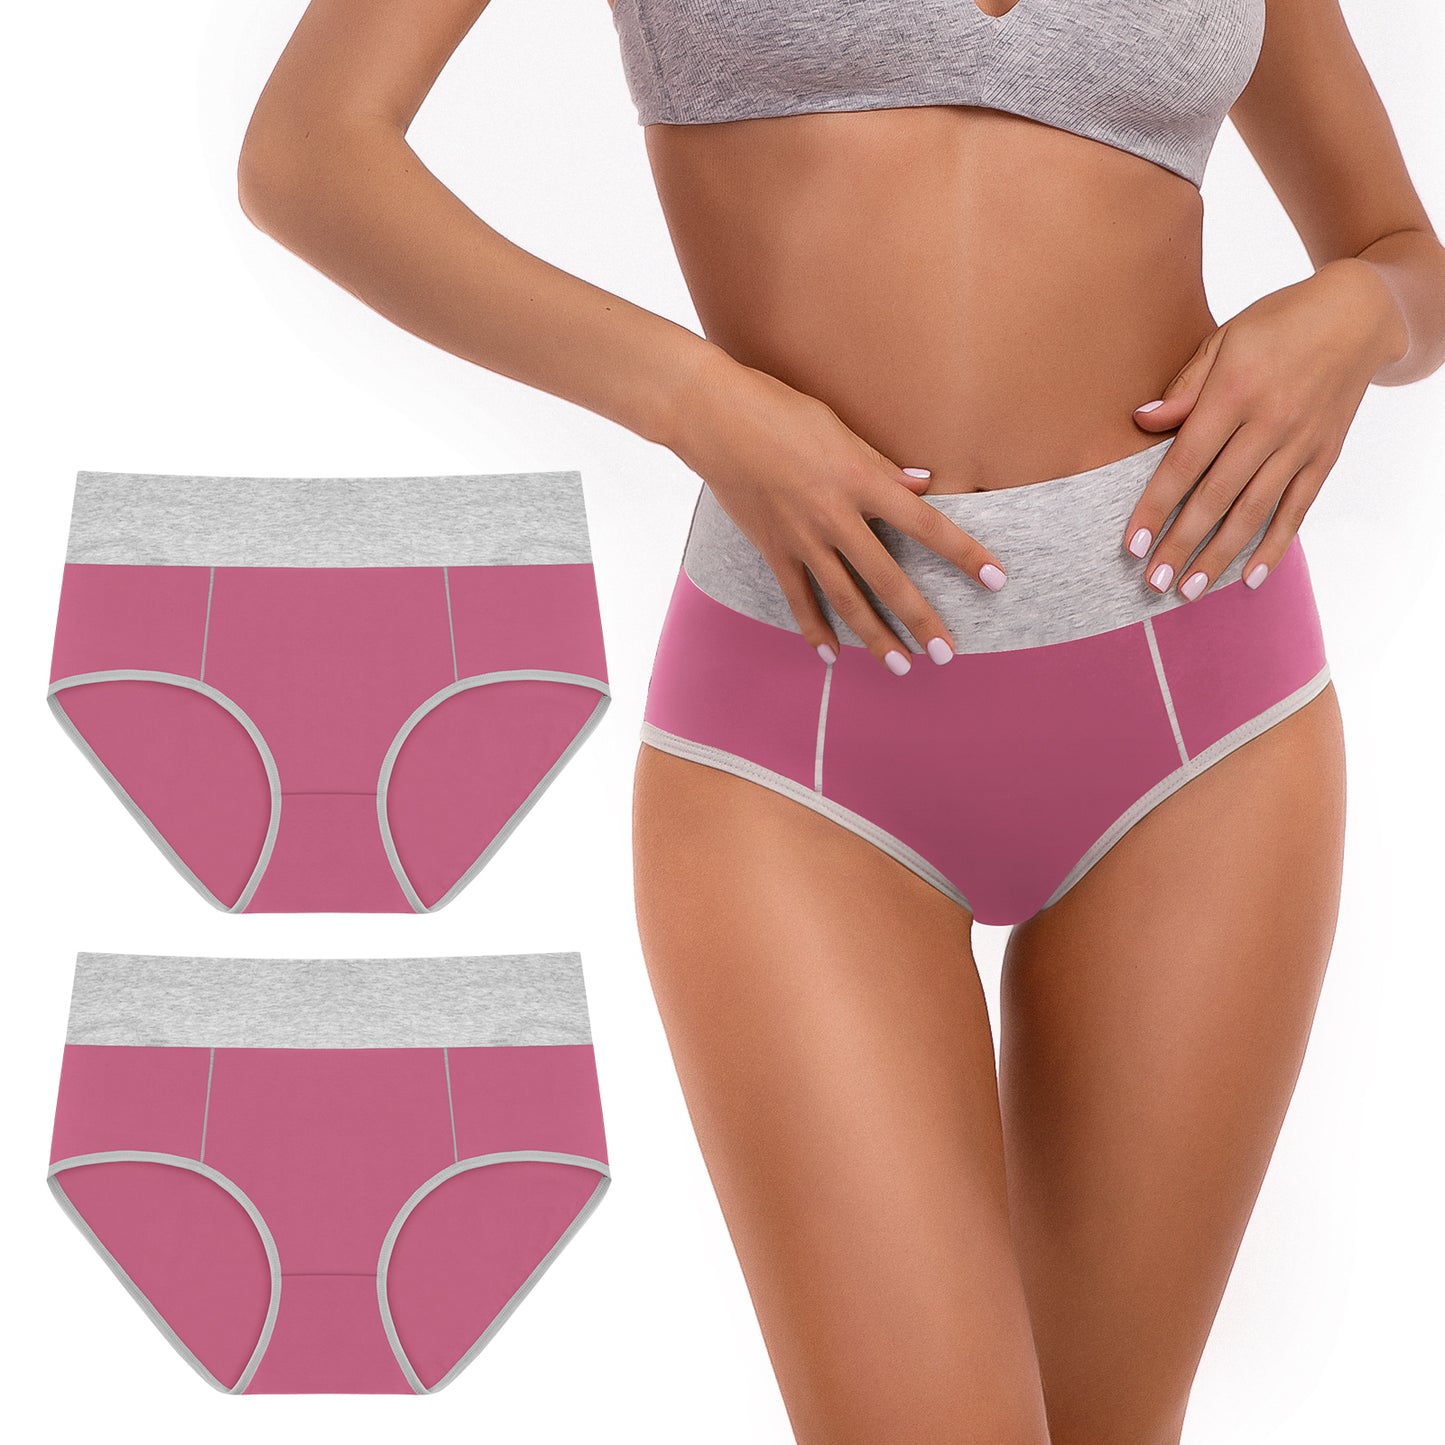 Sinophant Ladies Cotton Knickers High Waisted Knickers For Women